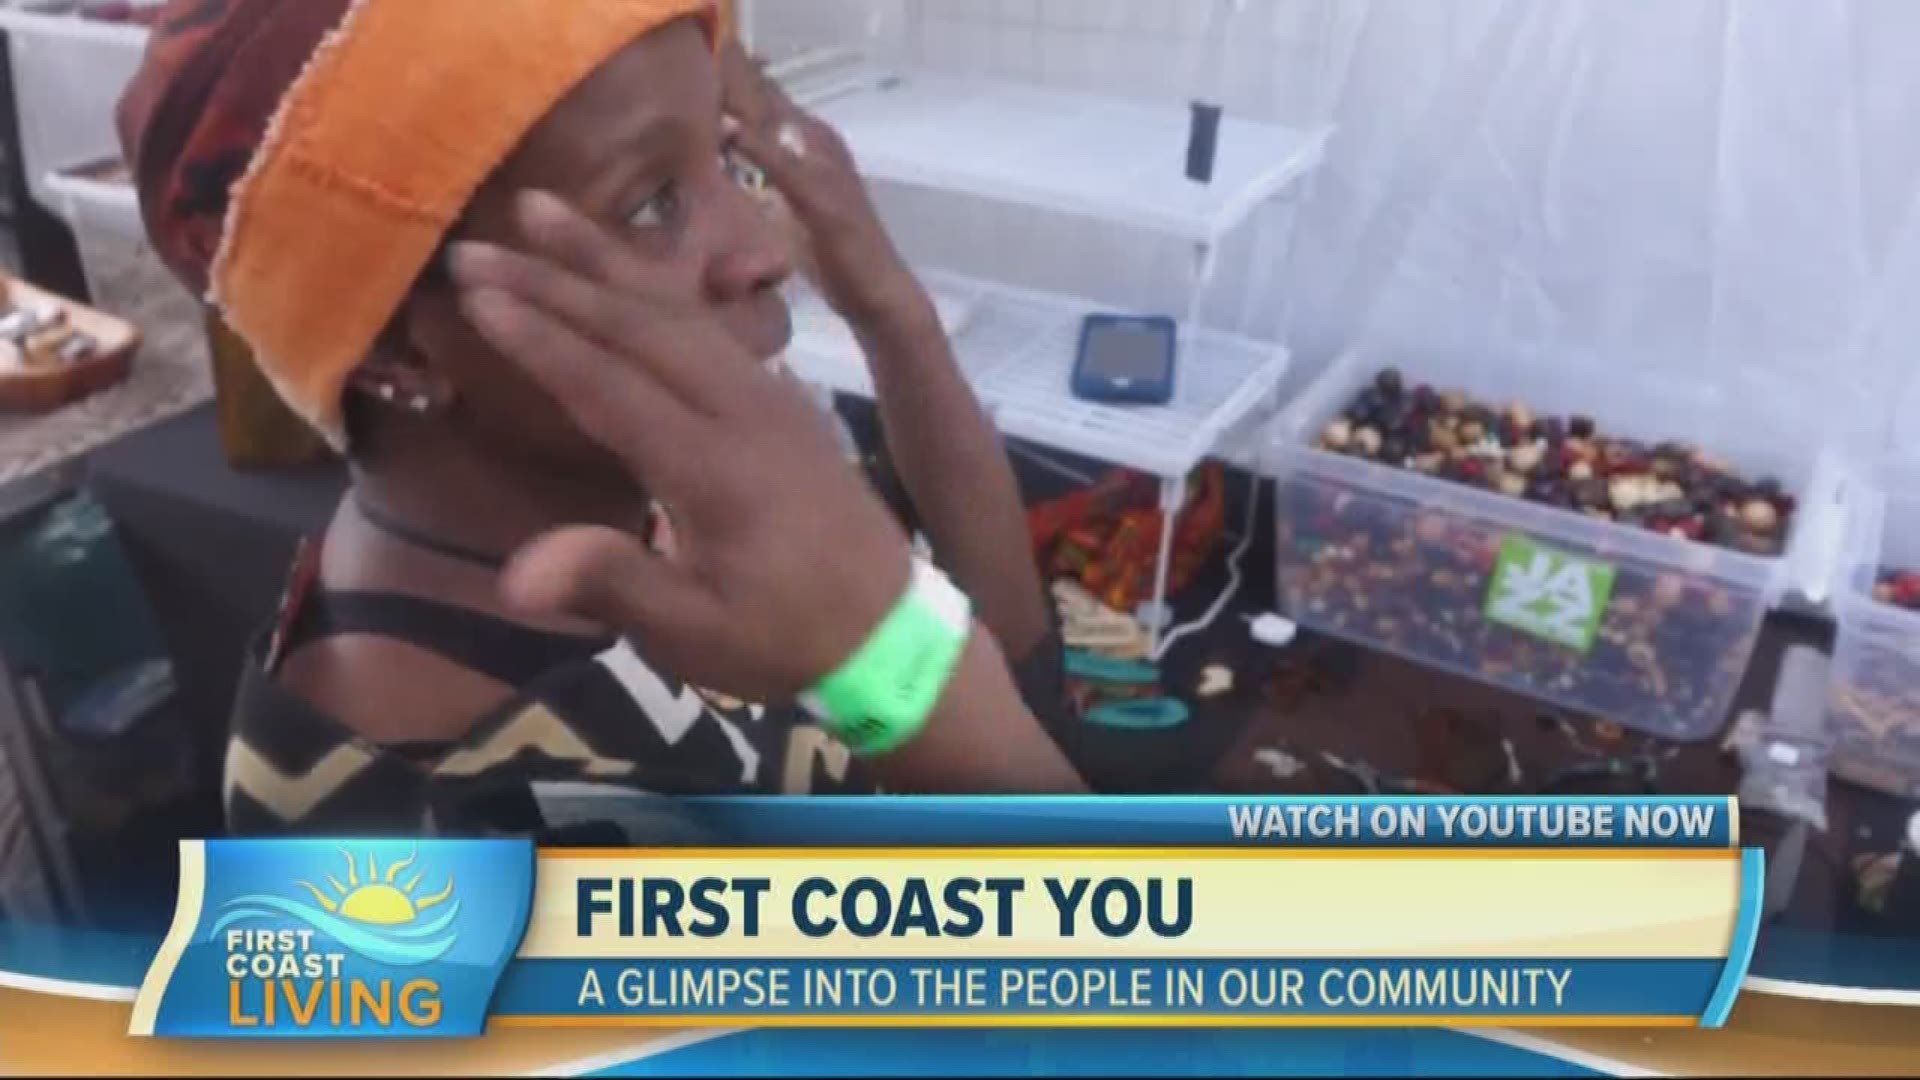 'First Coast You' gives a glimpse into the everyday people of the Jacksonville community.